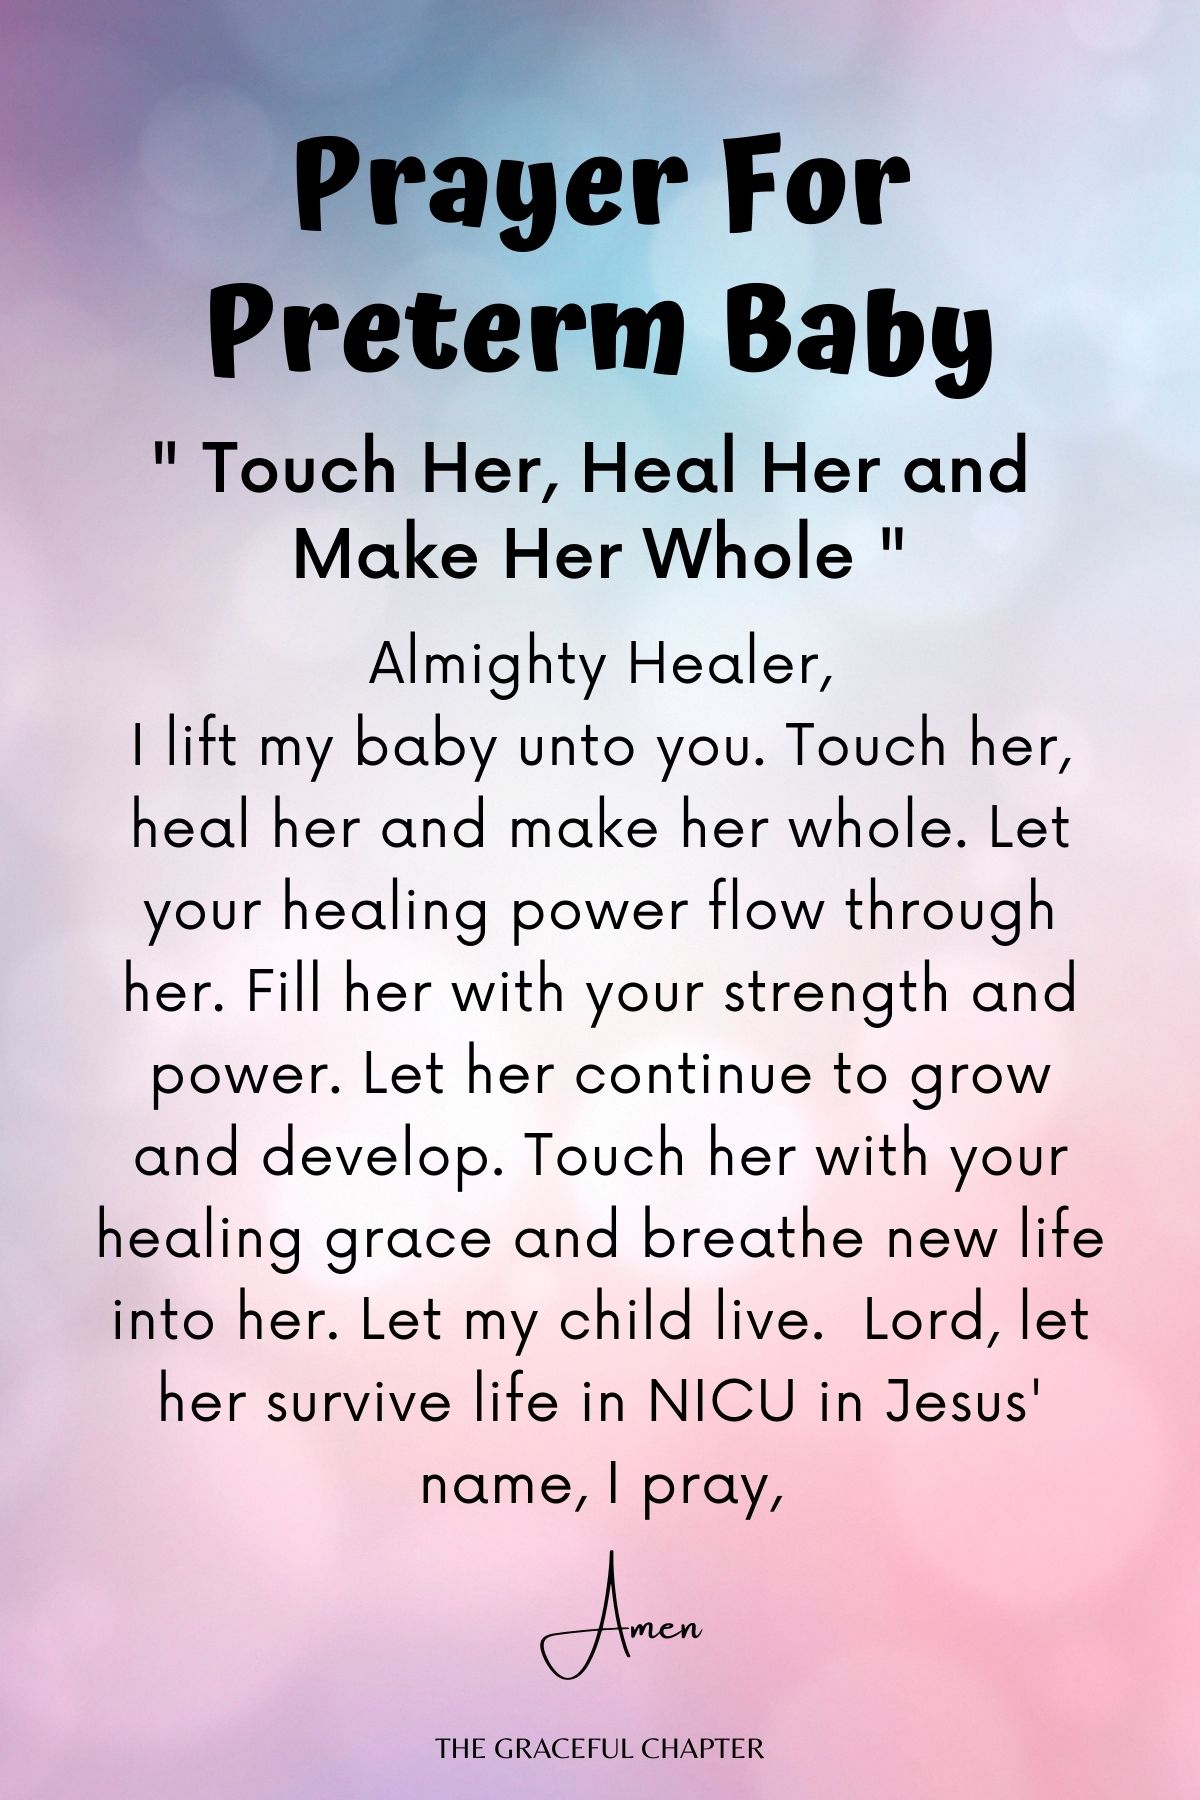 Touch her, heal her and make her whole - prayer for preterm baby